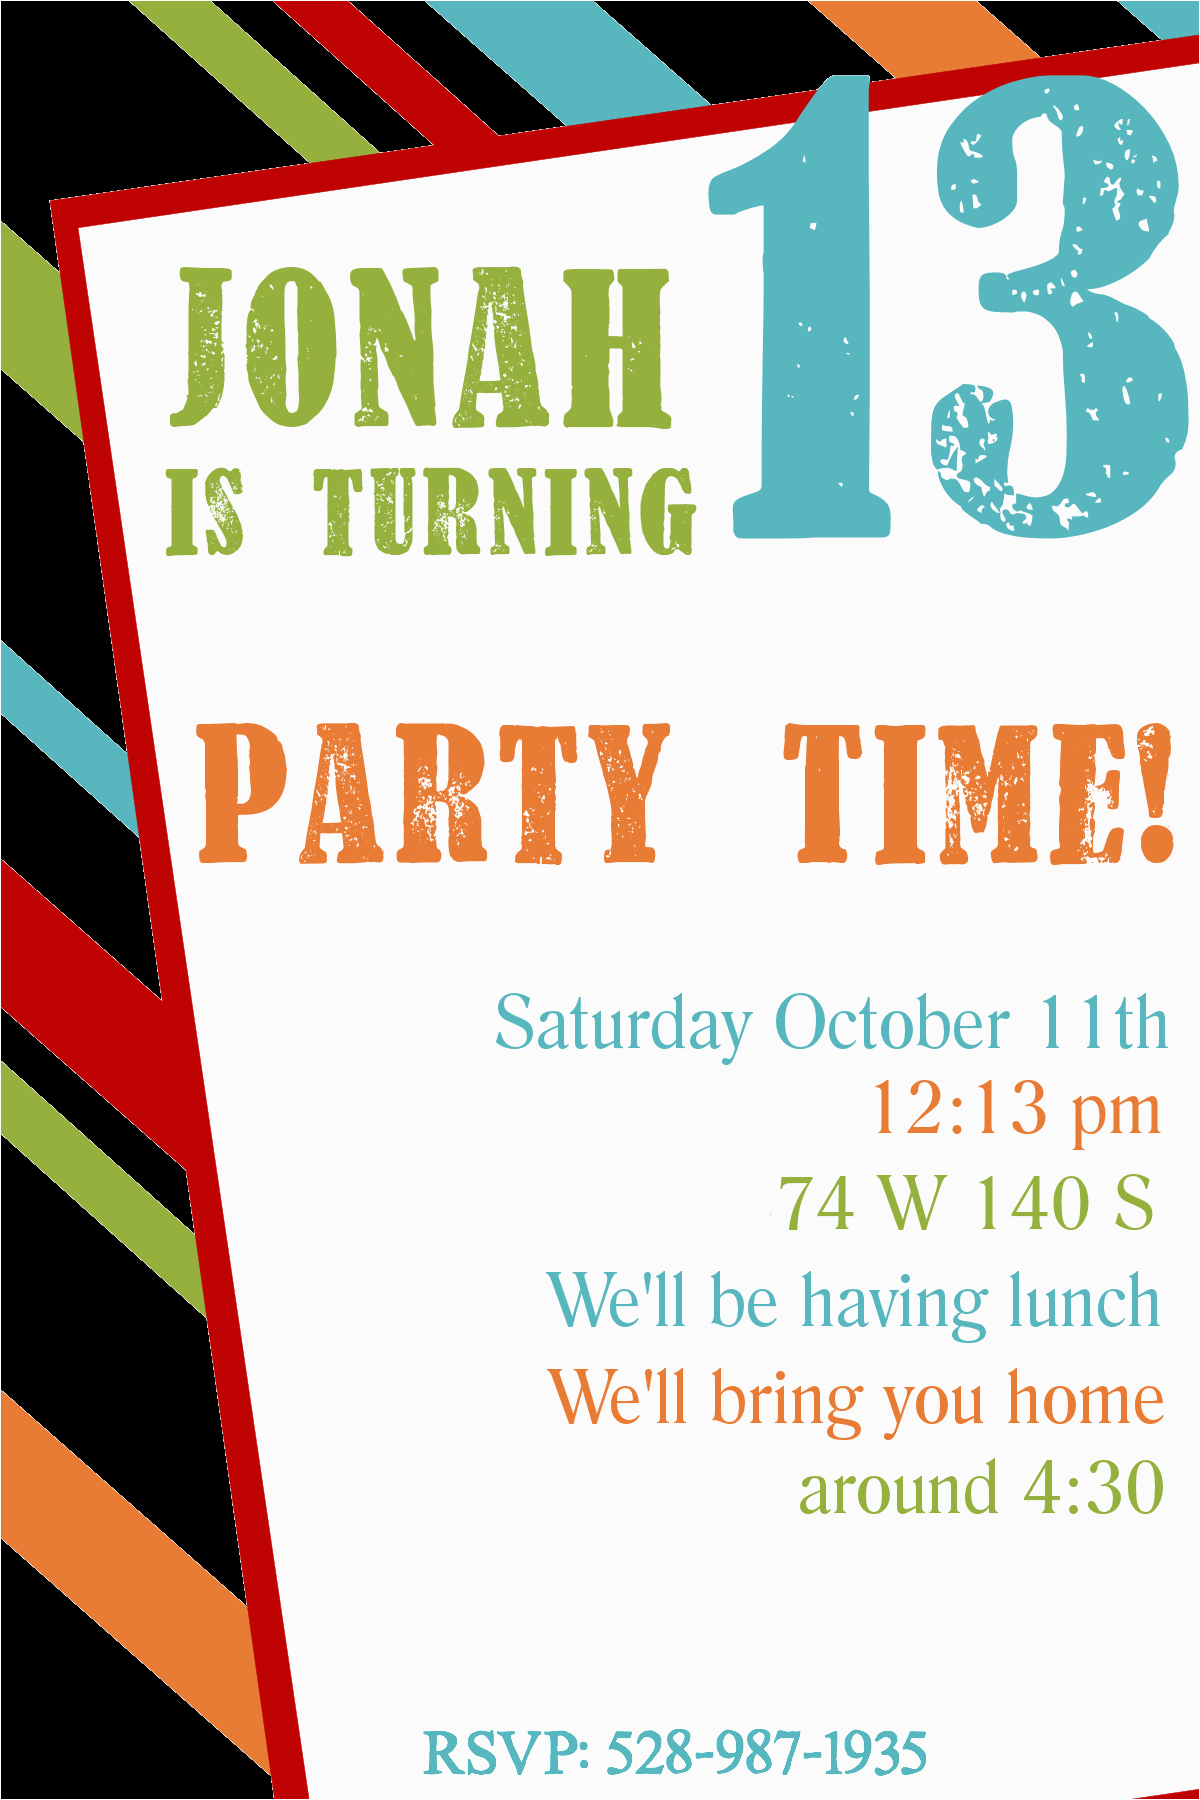 Make Birthday Party Invitations Online for Free to Print Free Printable Birthday Invitation Templates